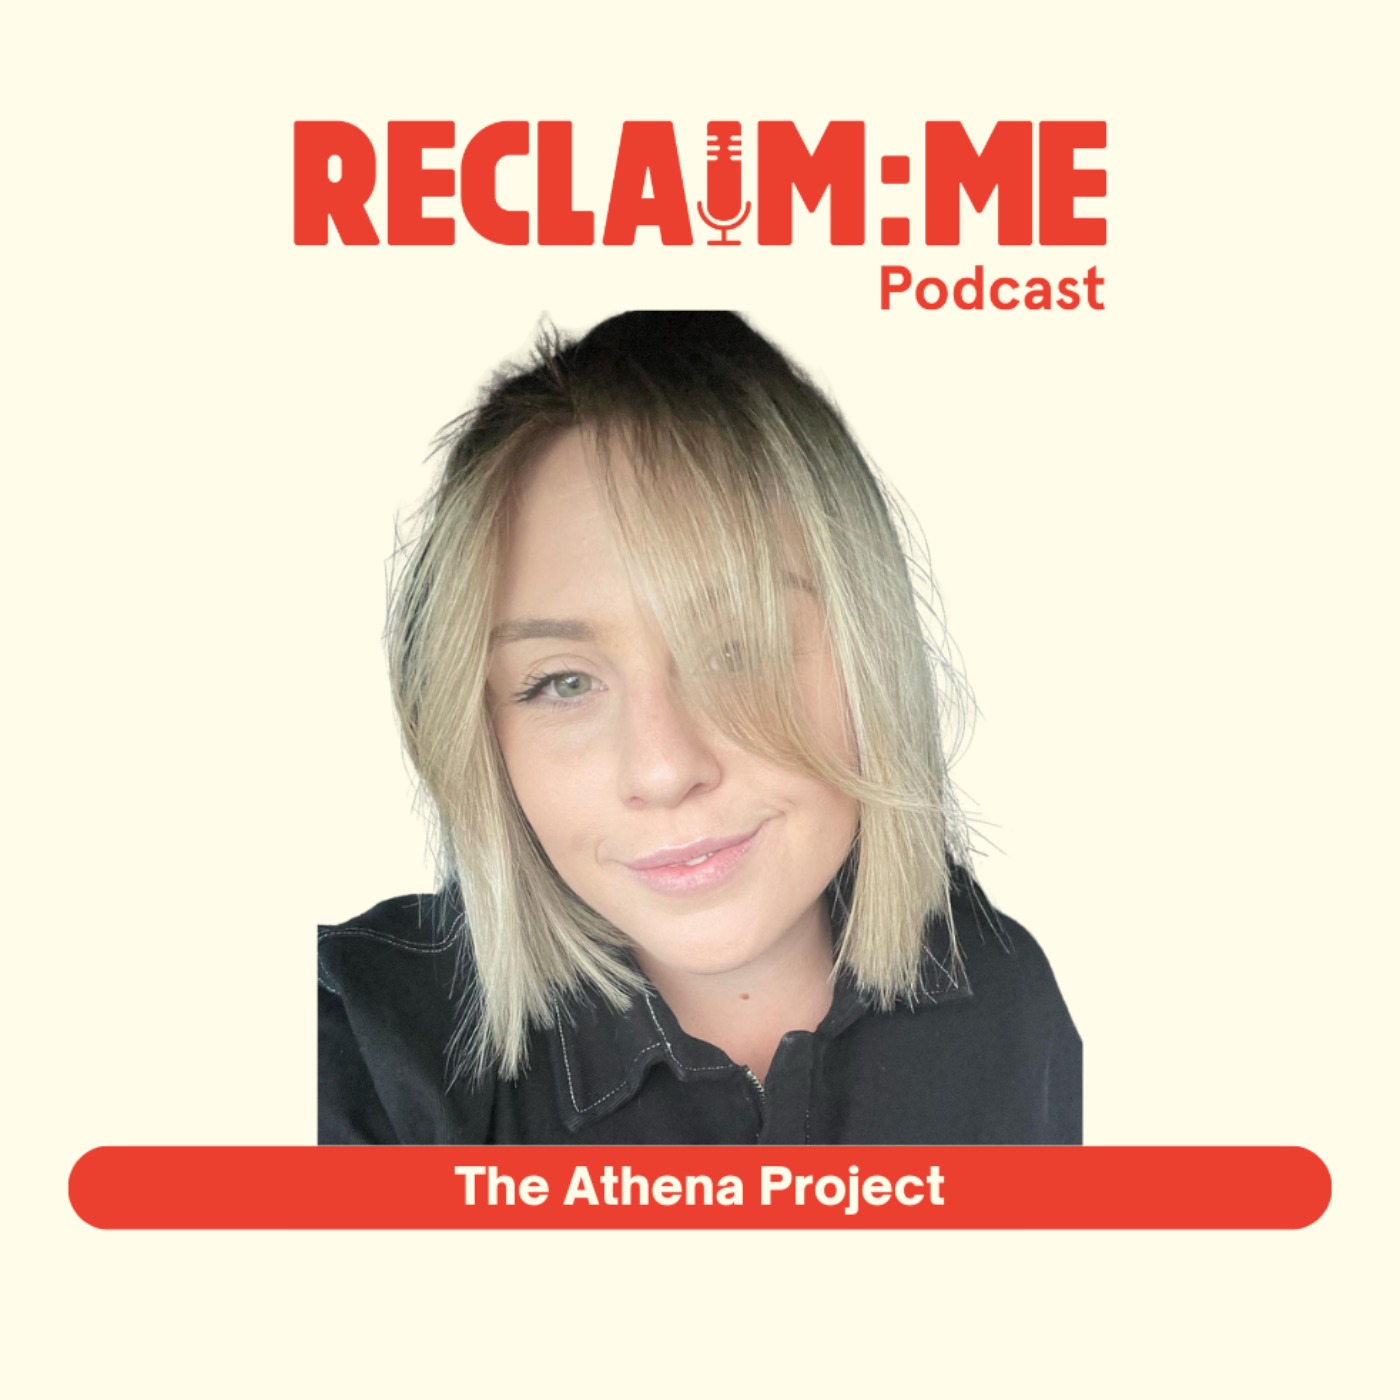 Episode 109 - The Athena Project - With Jordyn Gray - Part 5